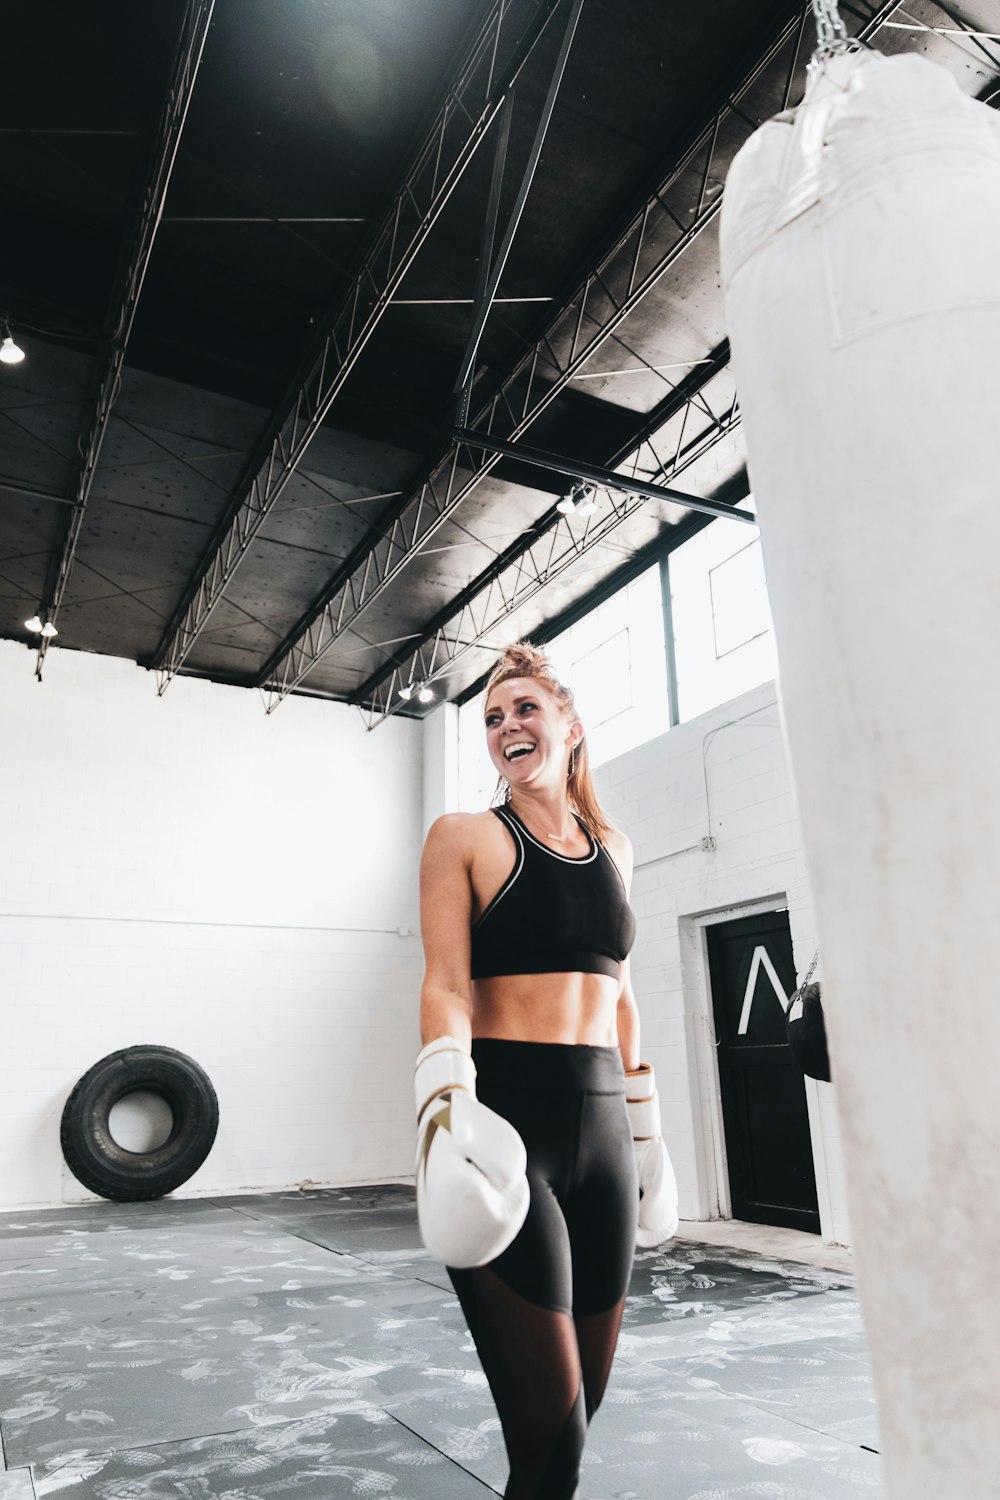 Woman in Black Sports Bra Working Out · Free Stock Photo